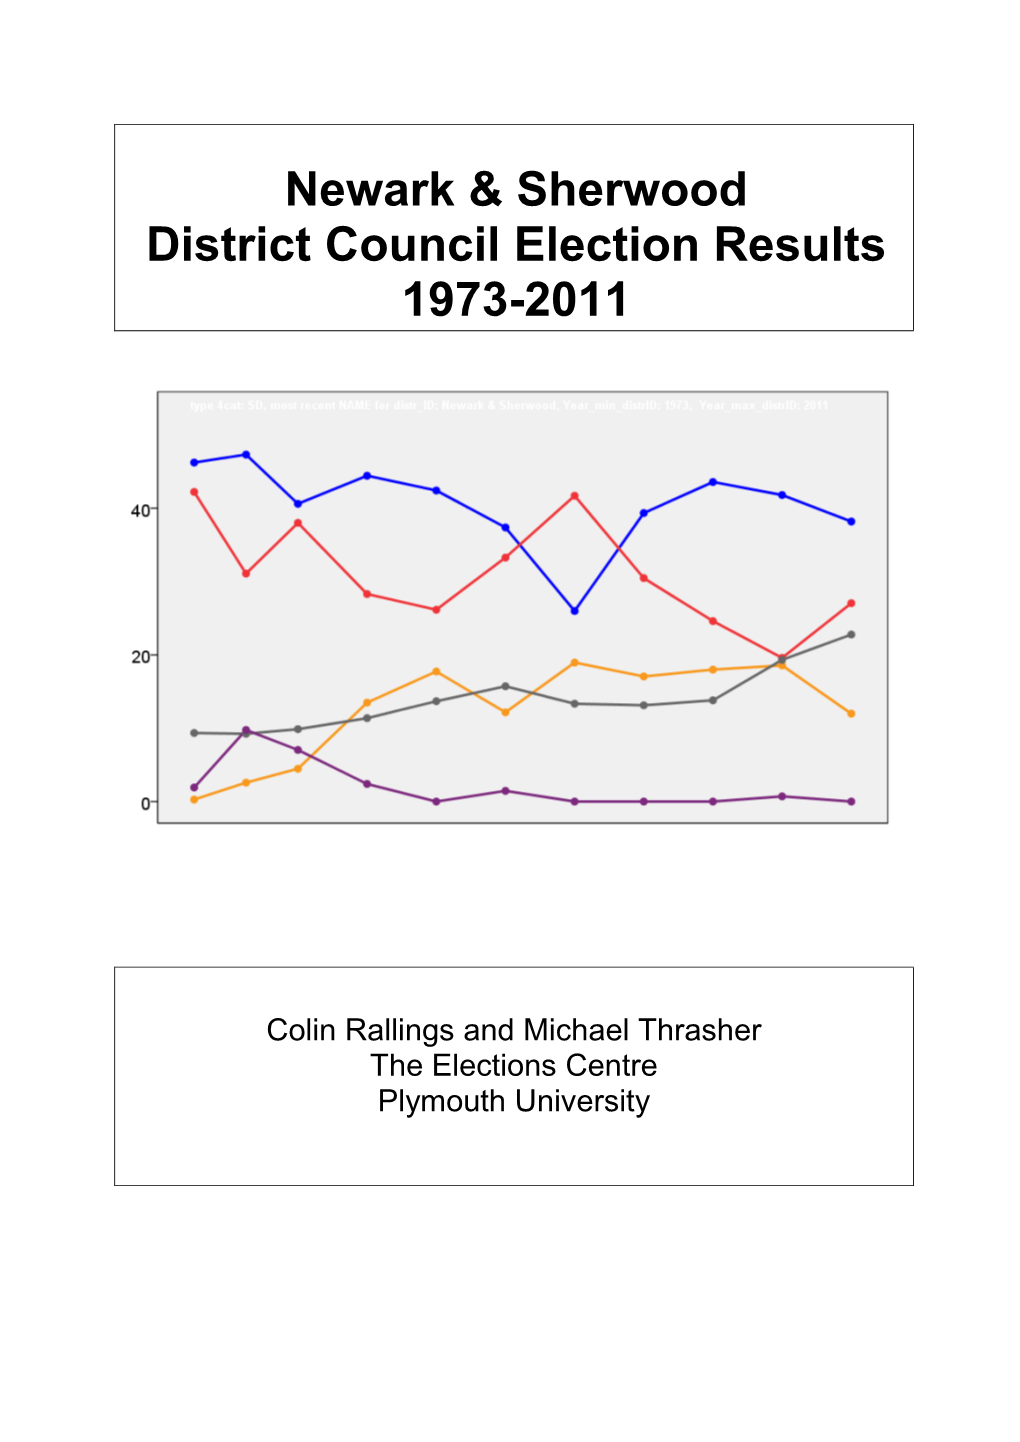 Newark & Sherwood District Council Election Results 1973-2011